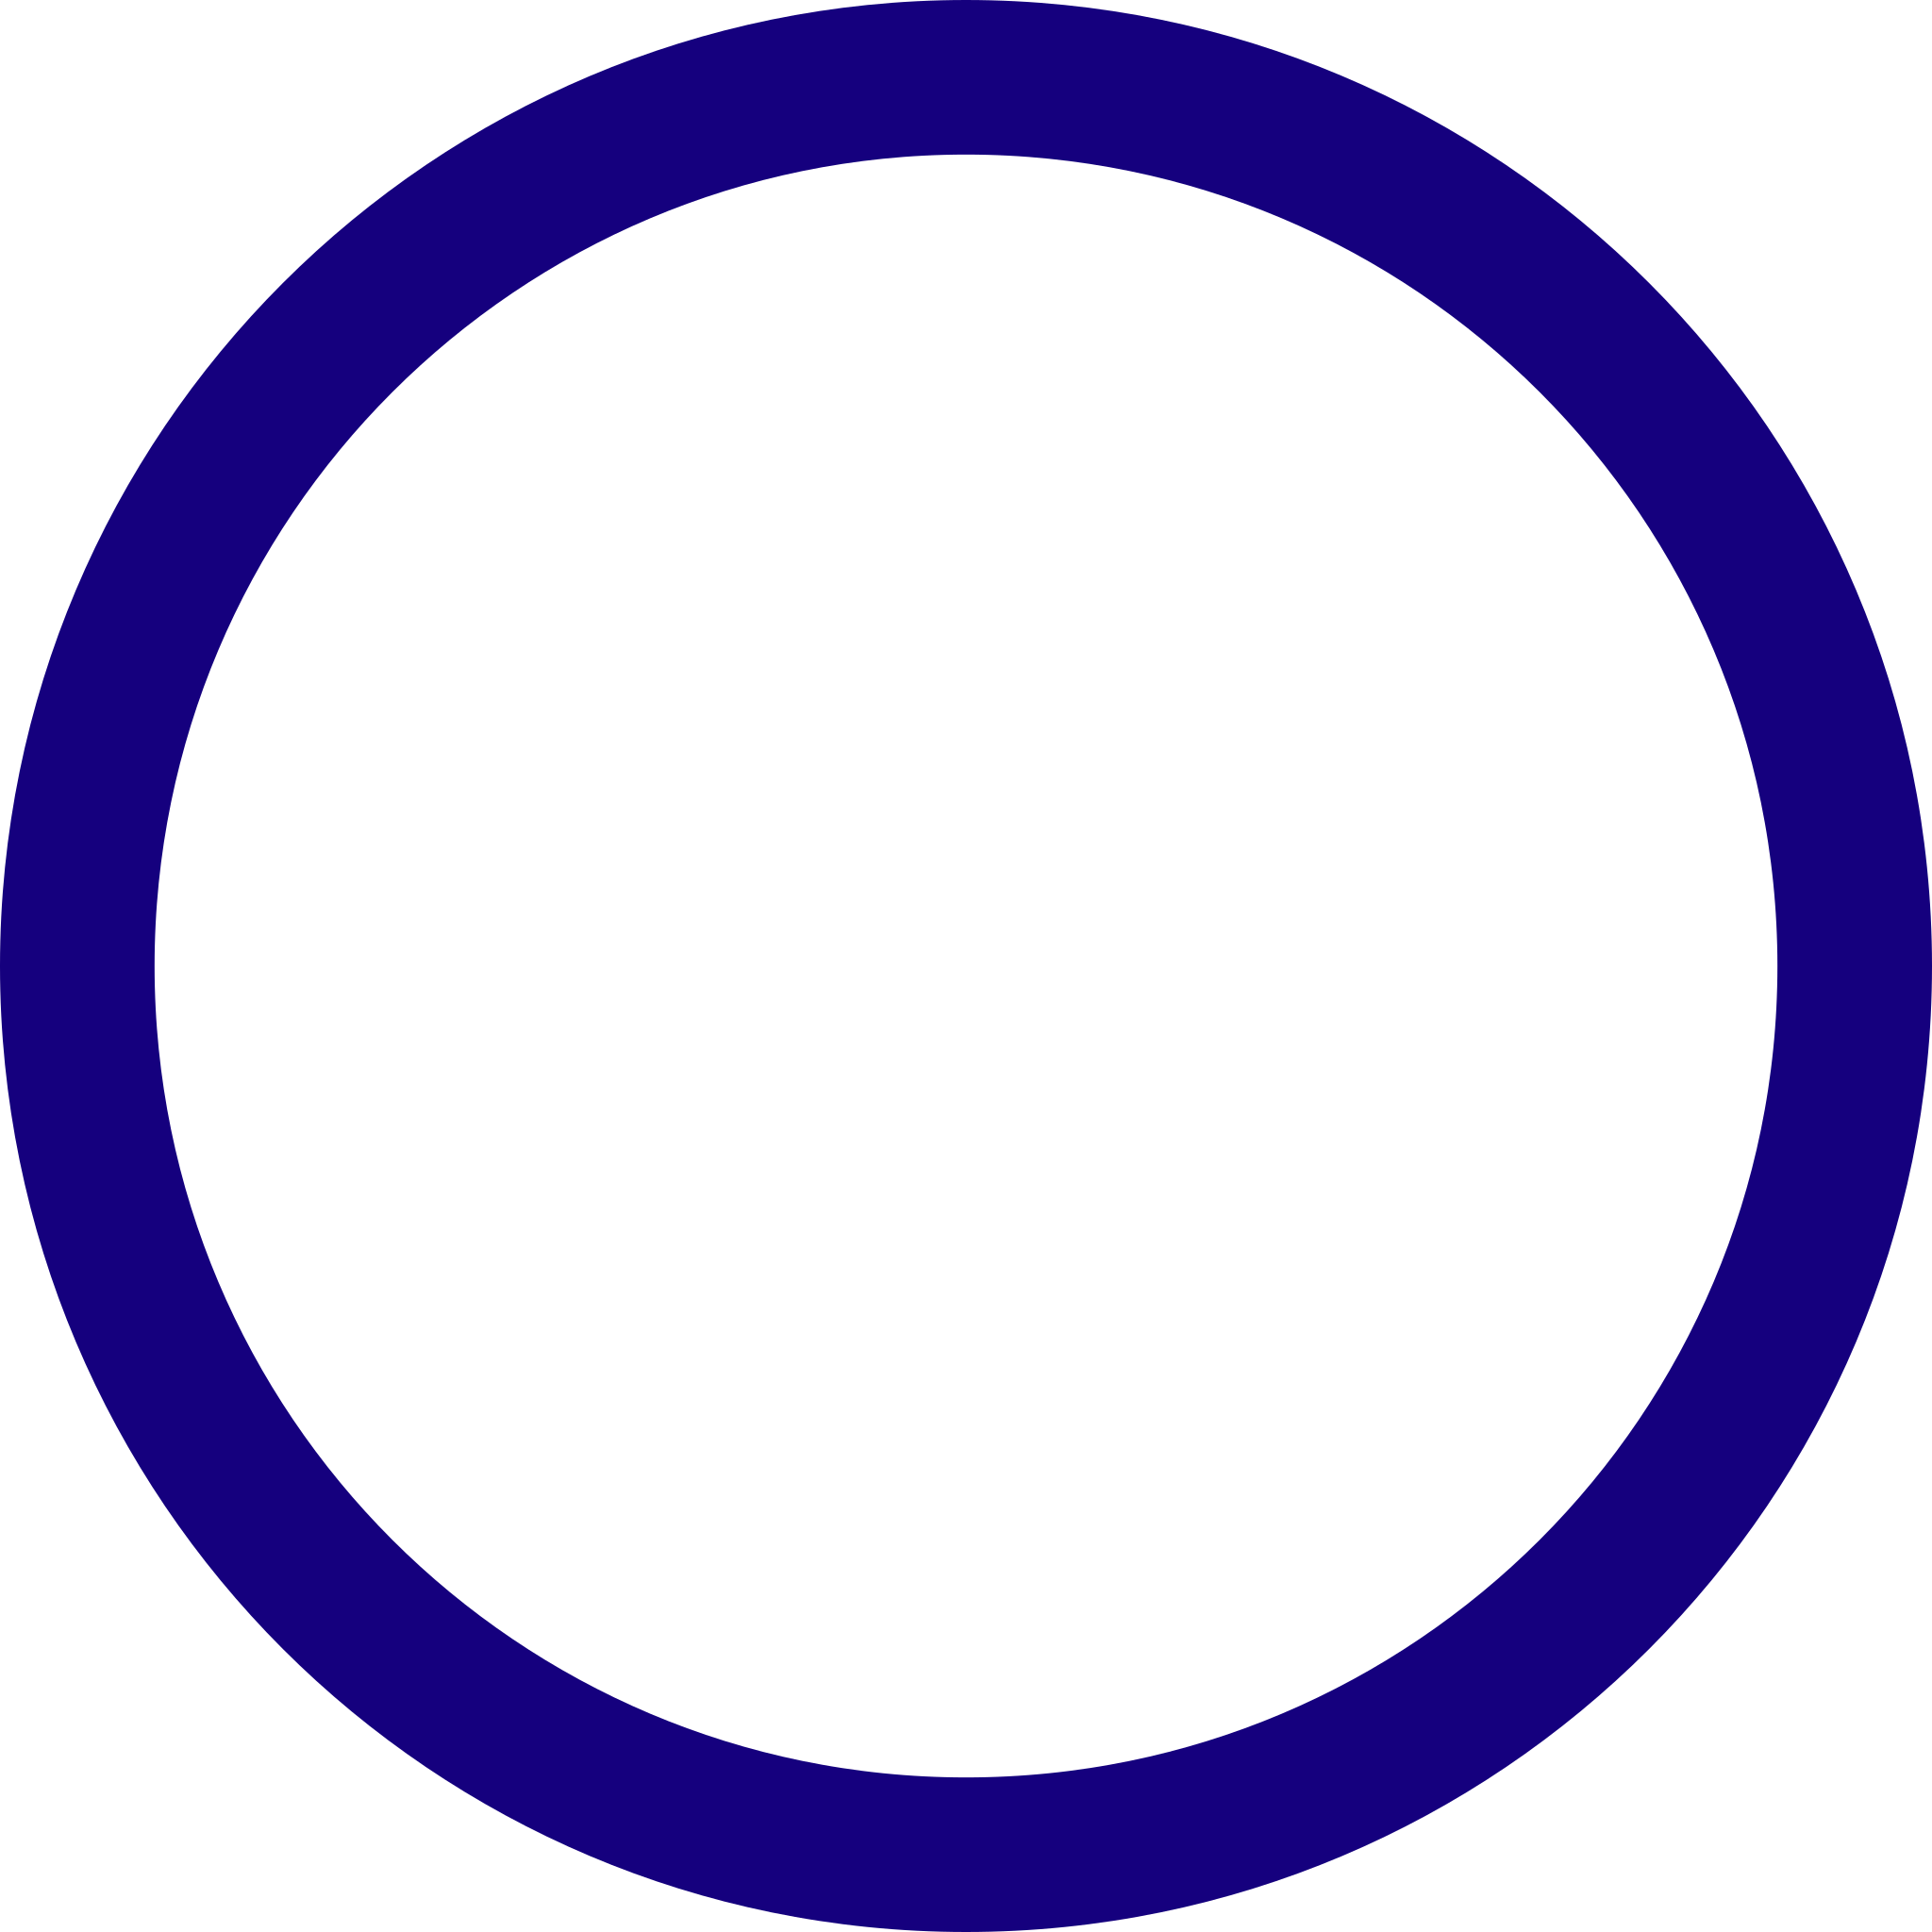 File:Red circle frame transparent.svg - Wikimedia Commons